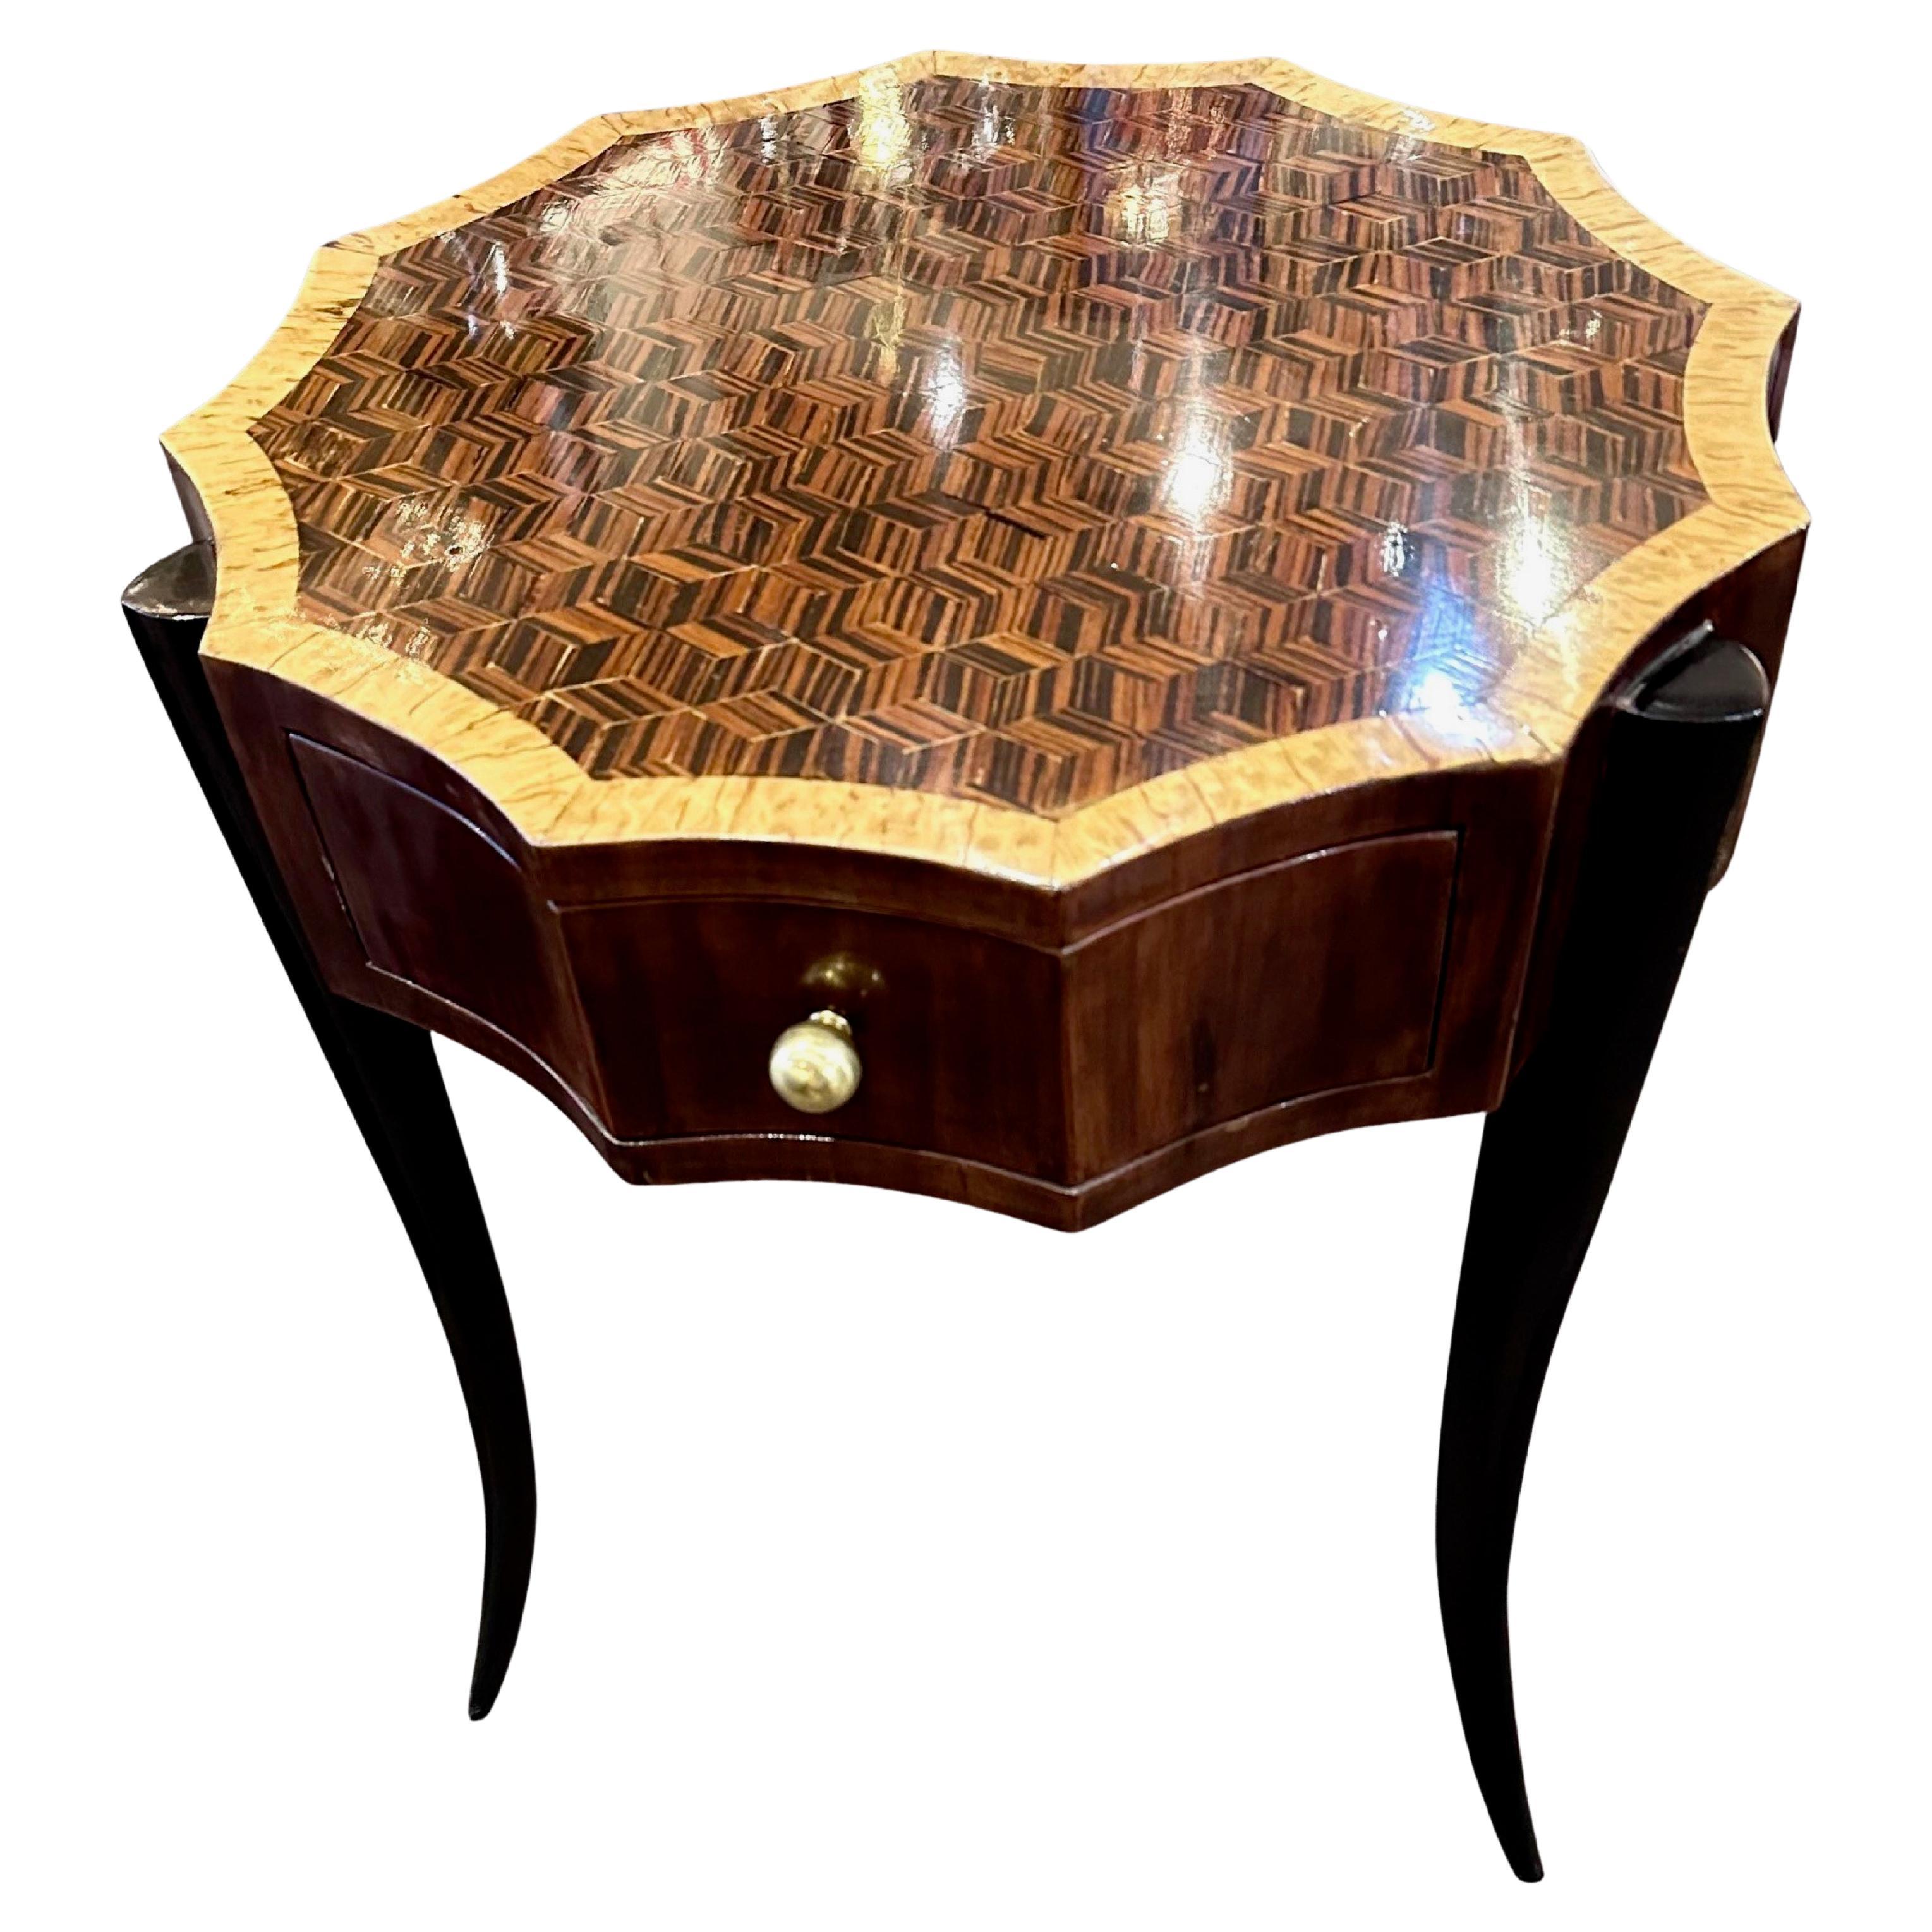 Art Deco Style 12-Sided Faceted Unique Marquetry Table